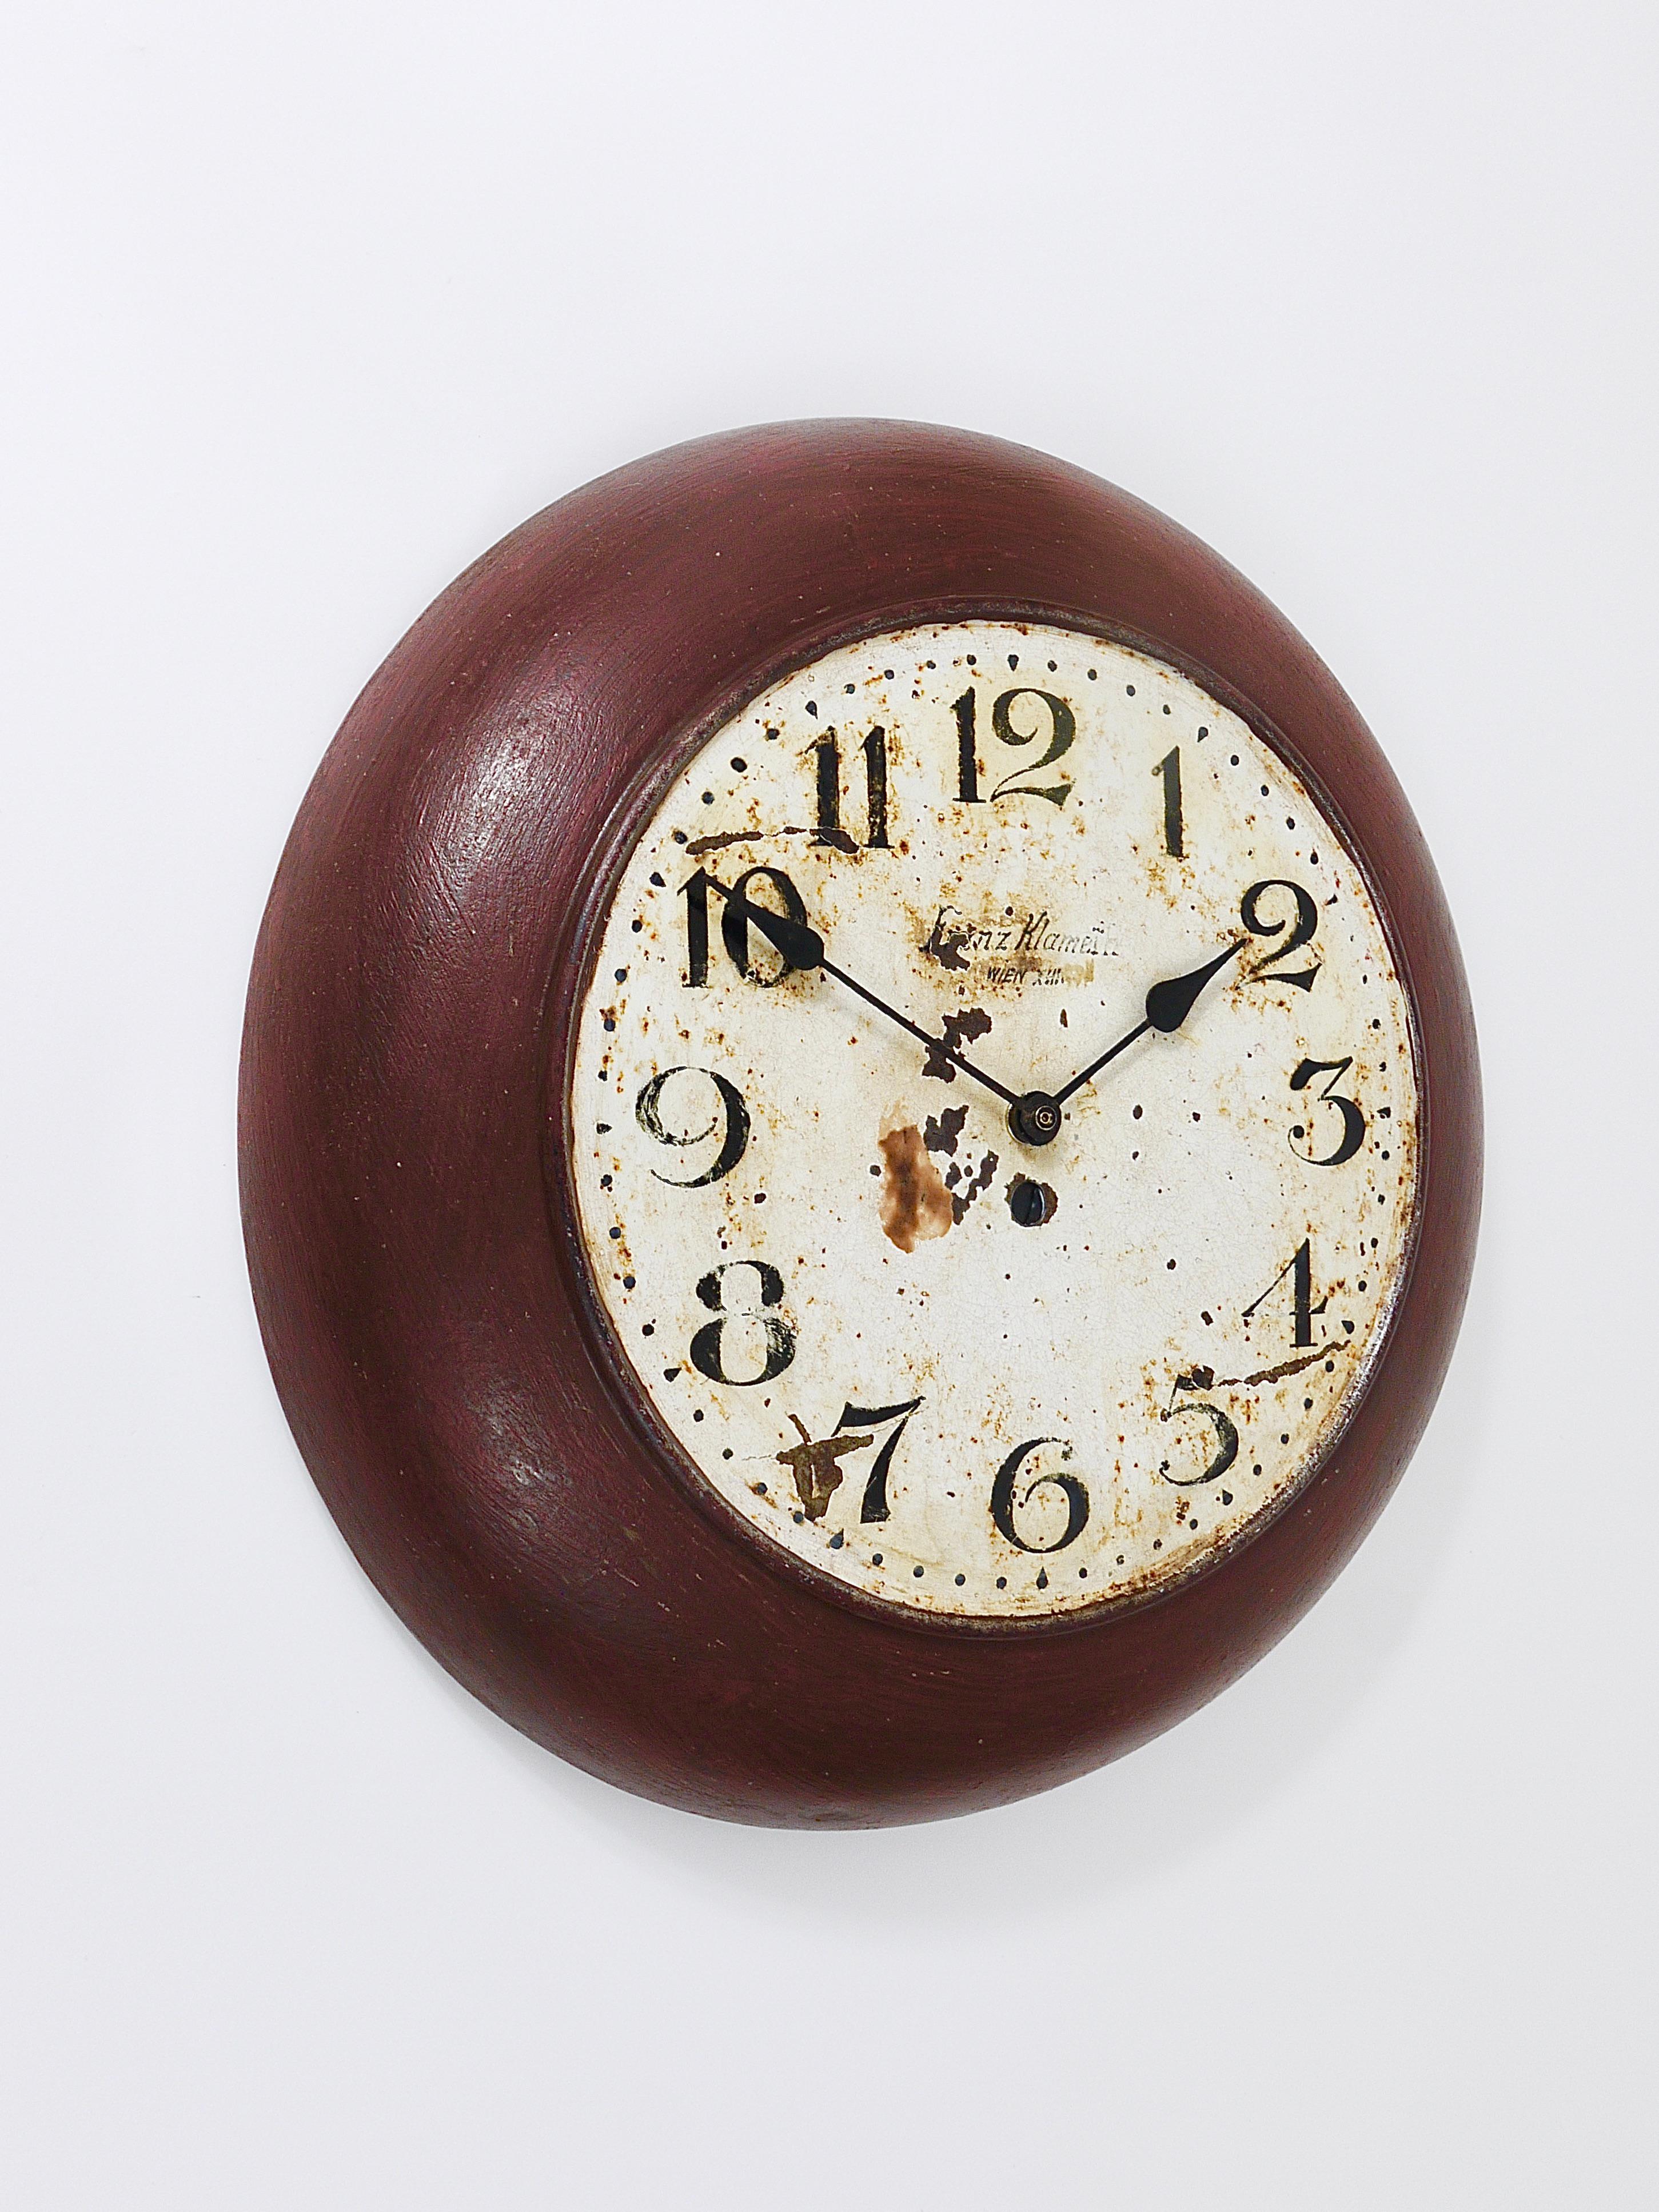 Antique 1920s Public Iron Wall Clock With Hand-Painted Dial, Industrial Style For Sale 6